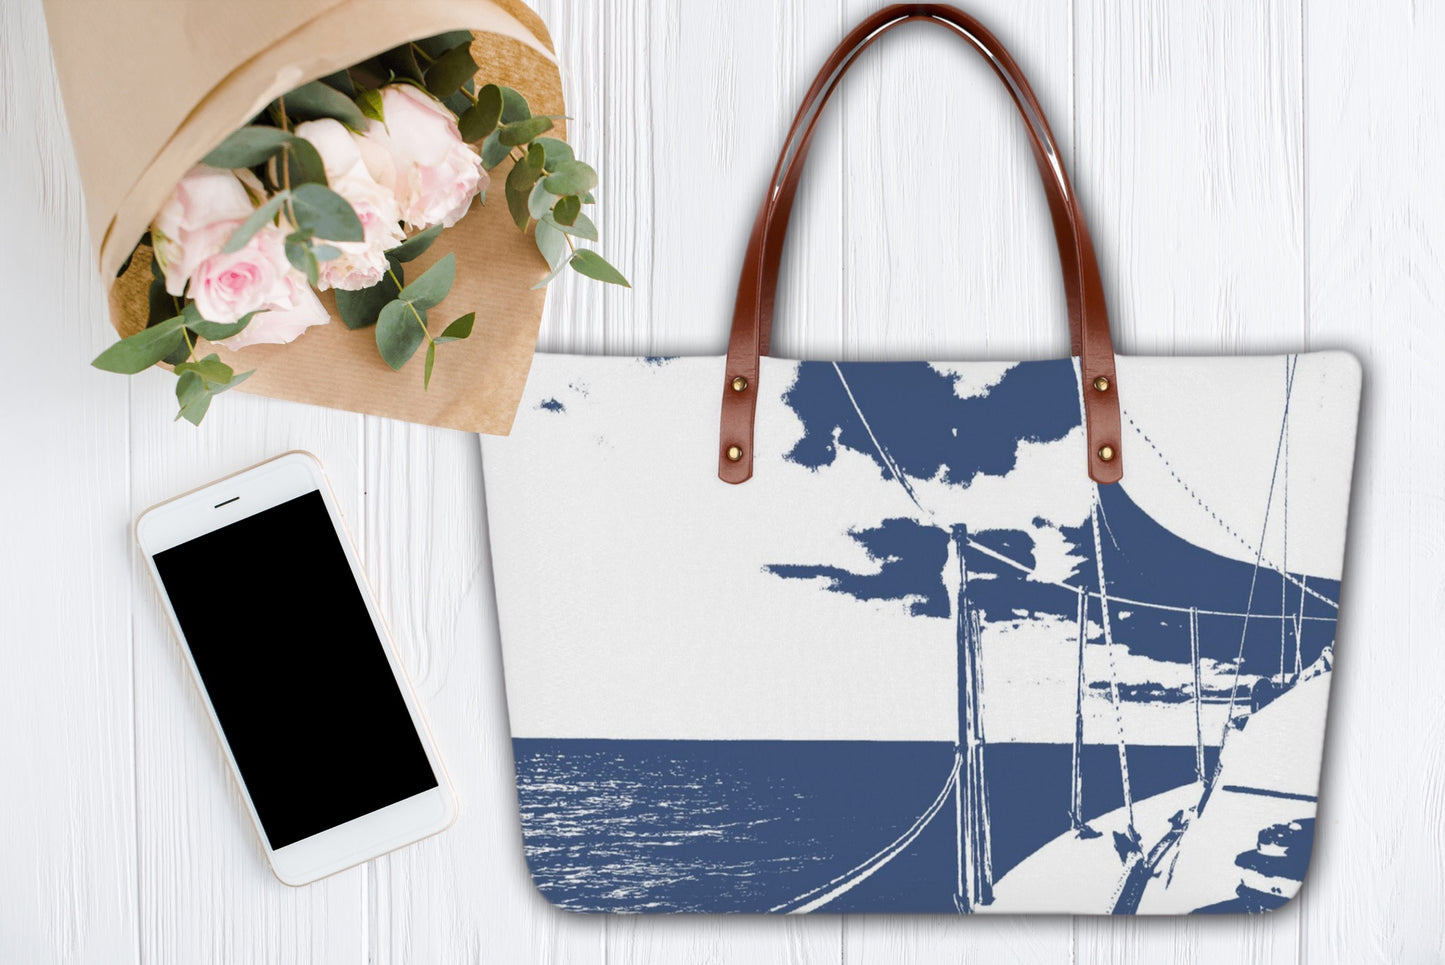 Sailing in the Blue -  Everyday Tote Bag